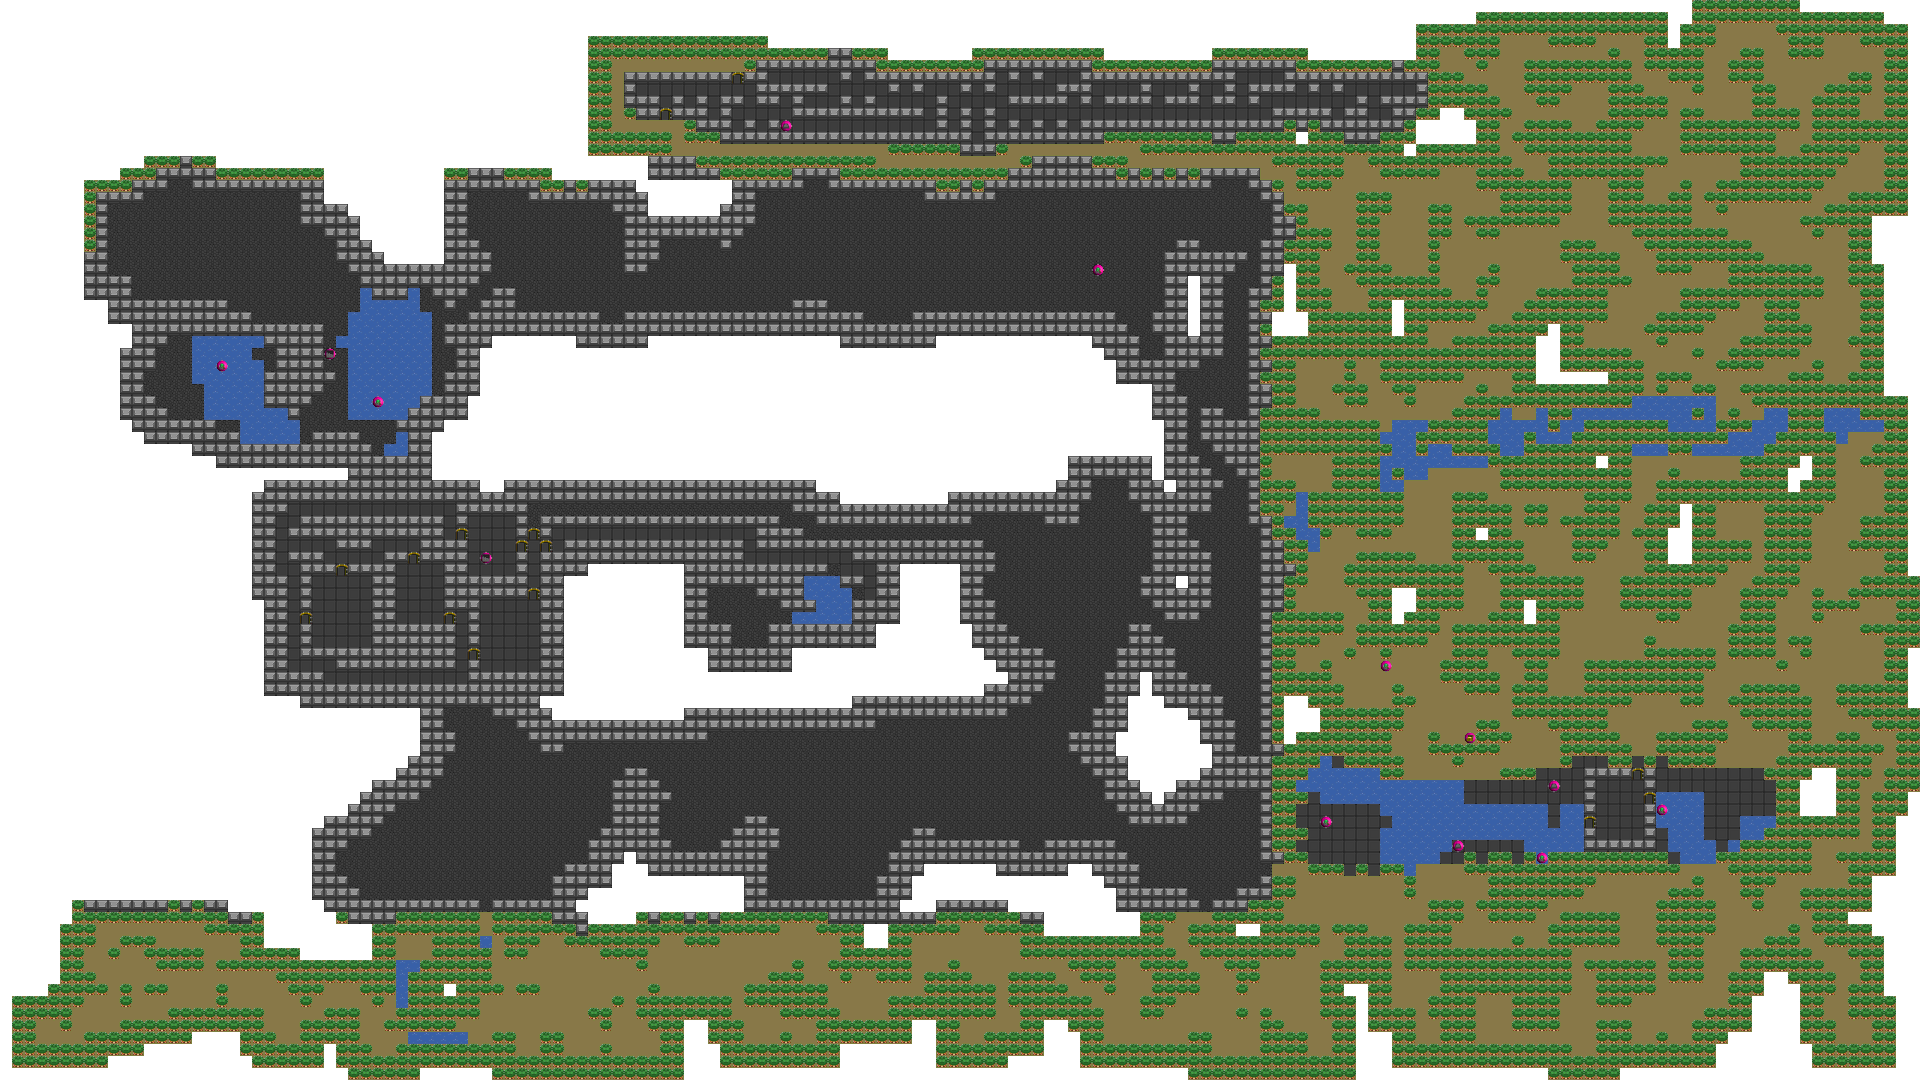 Stress-test example generated map